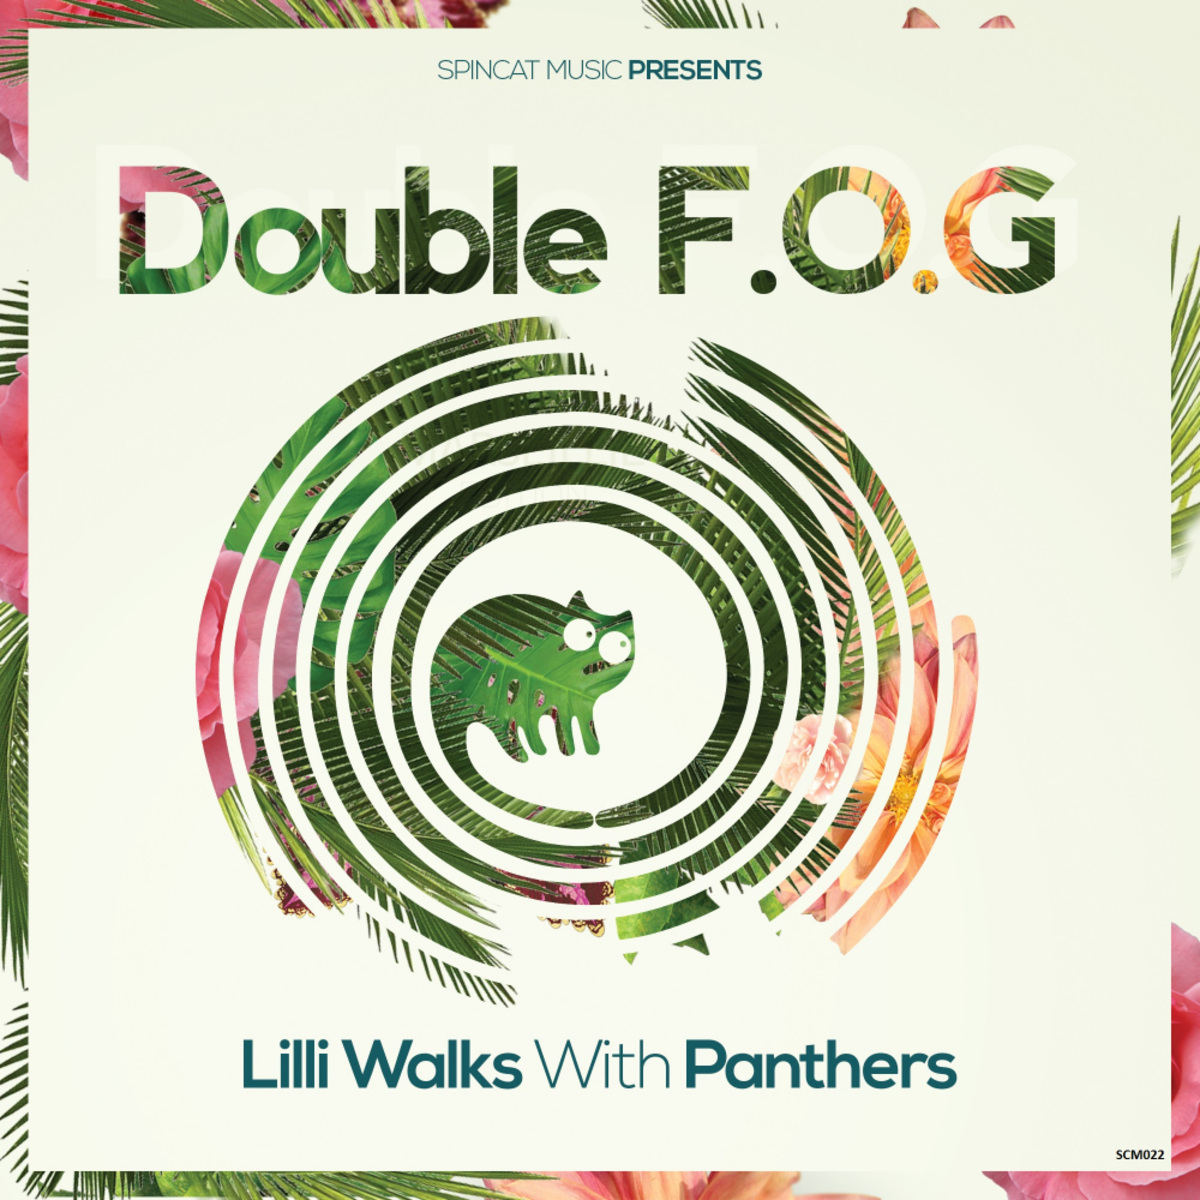 Double F.O.G - Lilli Walks With Panthers / SpinCat Music